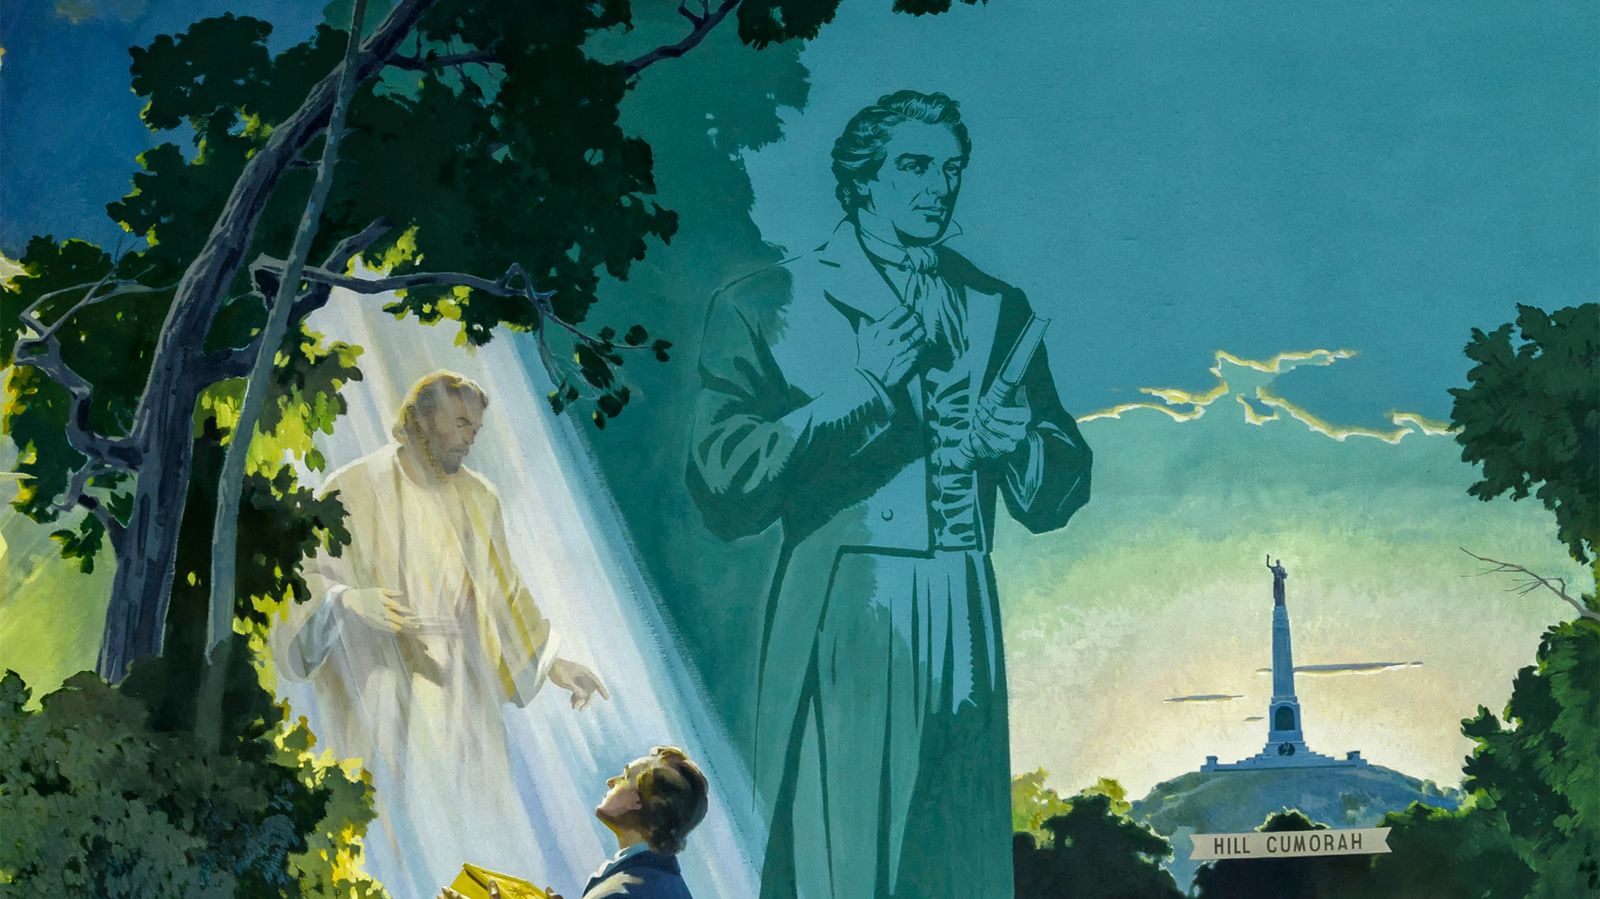 A section of the Cody Mural. "Created to tell the story of the Church of Jesus Christ of Latter-day Saints, including the westward expansion of the Mormon pioneers, the Cody Mural is rich in color, content and history. It is a mid-century masterpiece created by the talented and prolific artist Edward T. Grigware and took nearly two years to complete. Grigware’s technical expertise in Western realistic painting, as well as the mural’s one-of-a-kind medium and location create a fascinating work of art and an intricate storytelling device."

 - http://codymural.com/mural/